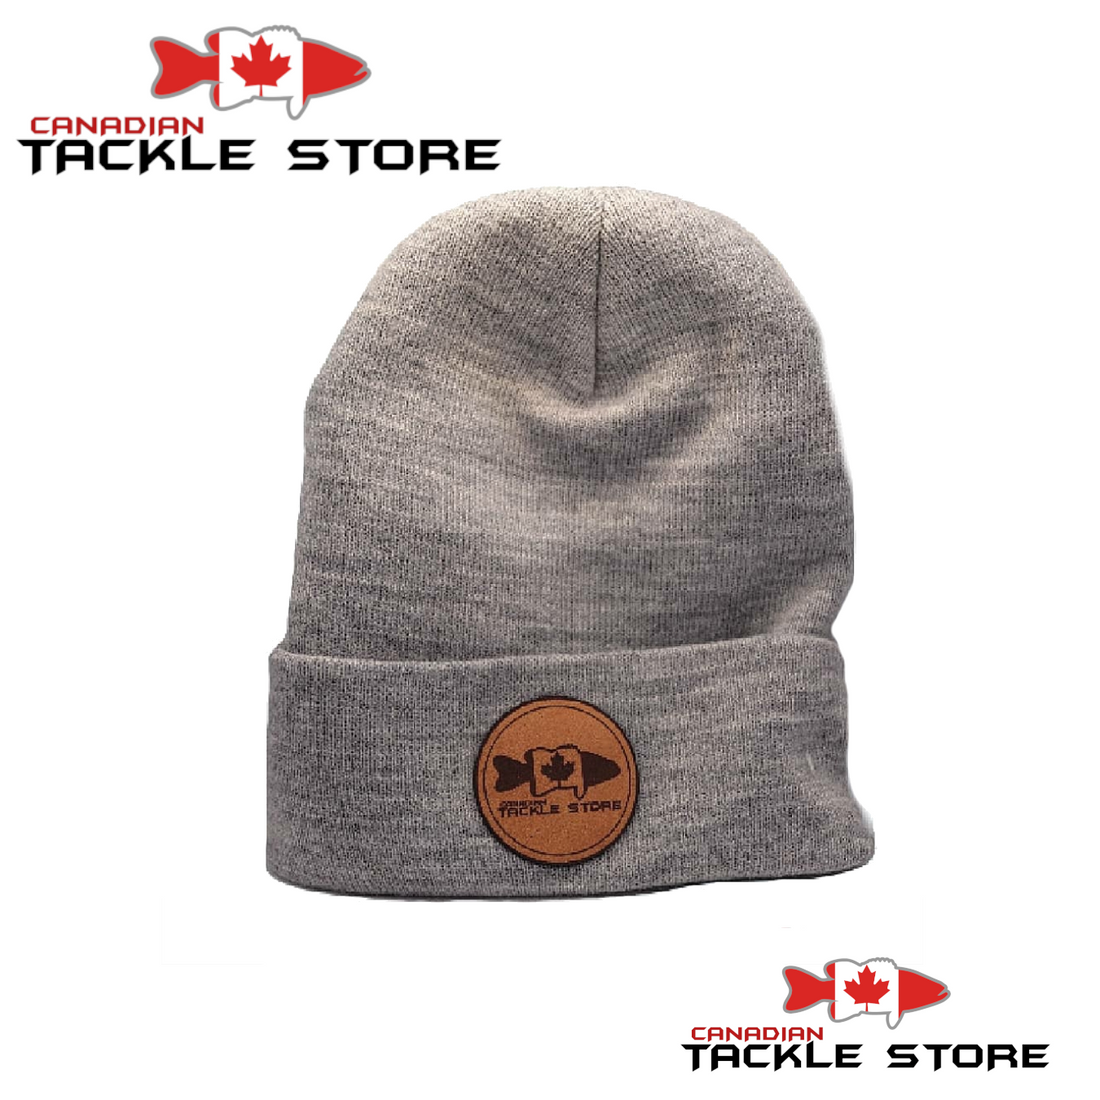 Canadian Tackle Store Official Toques